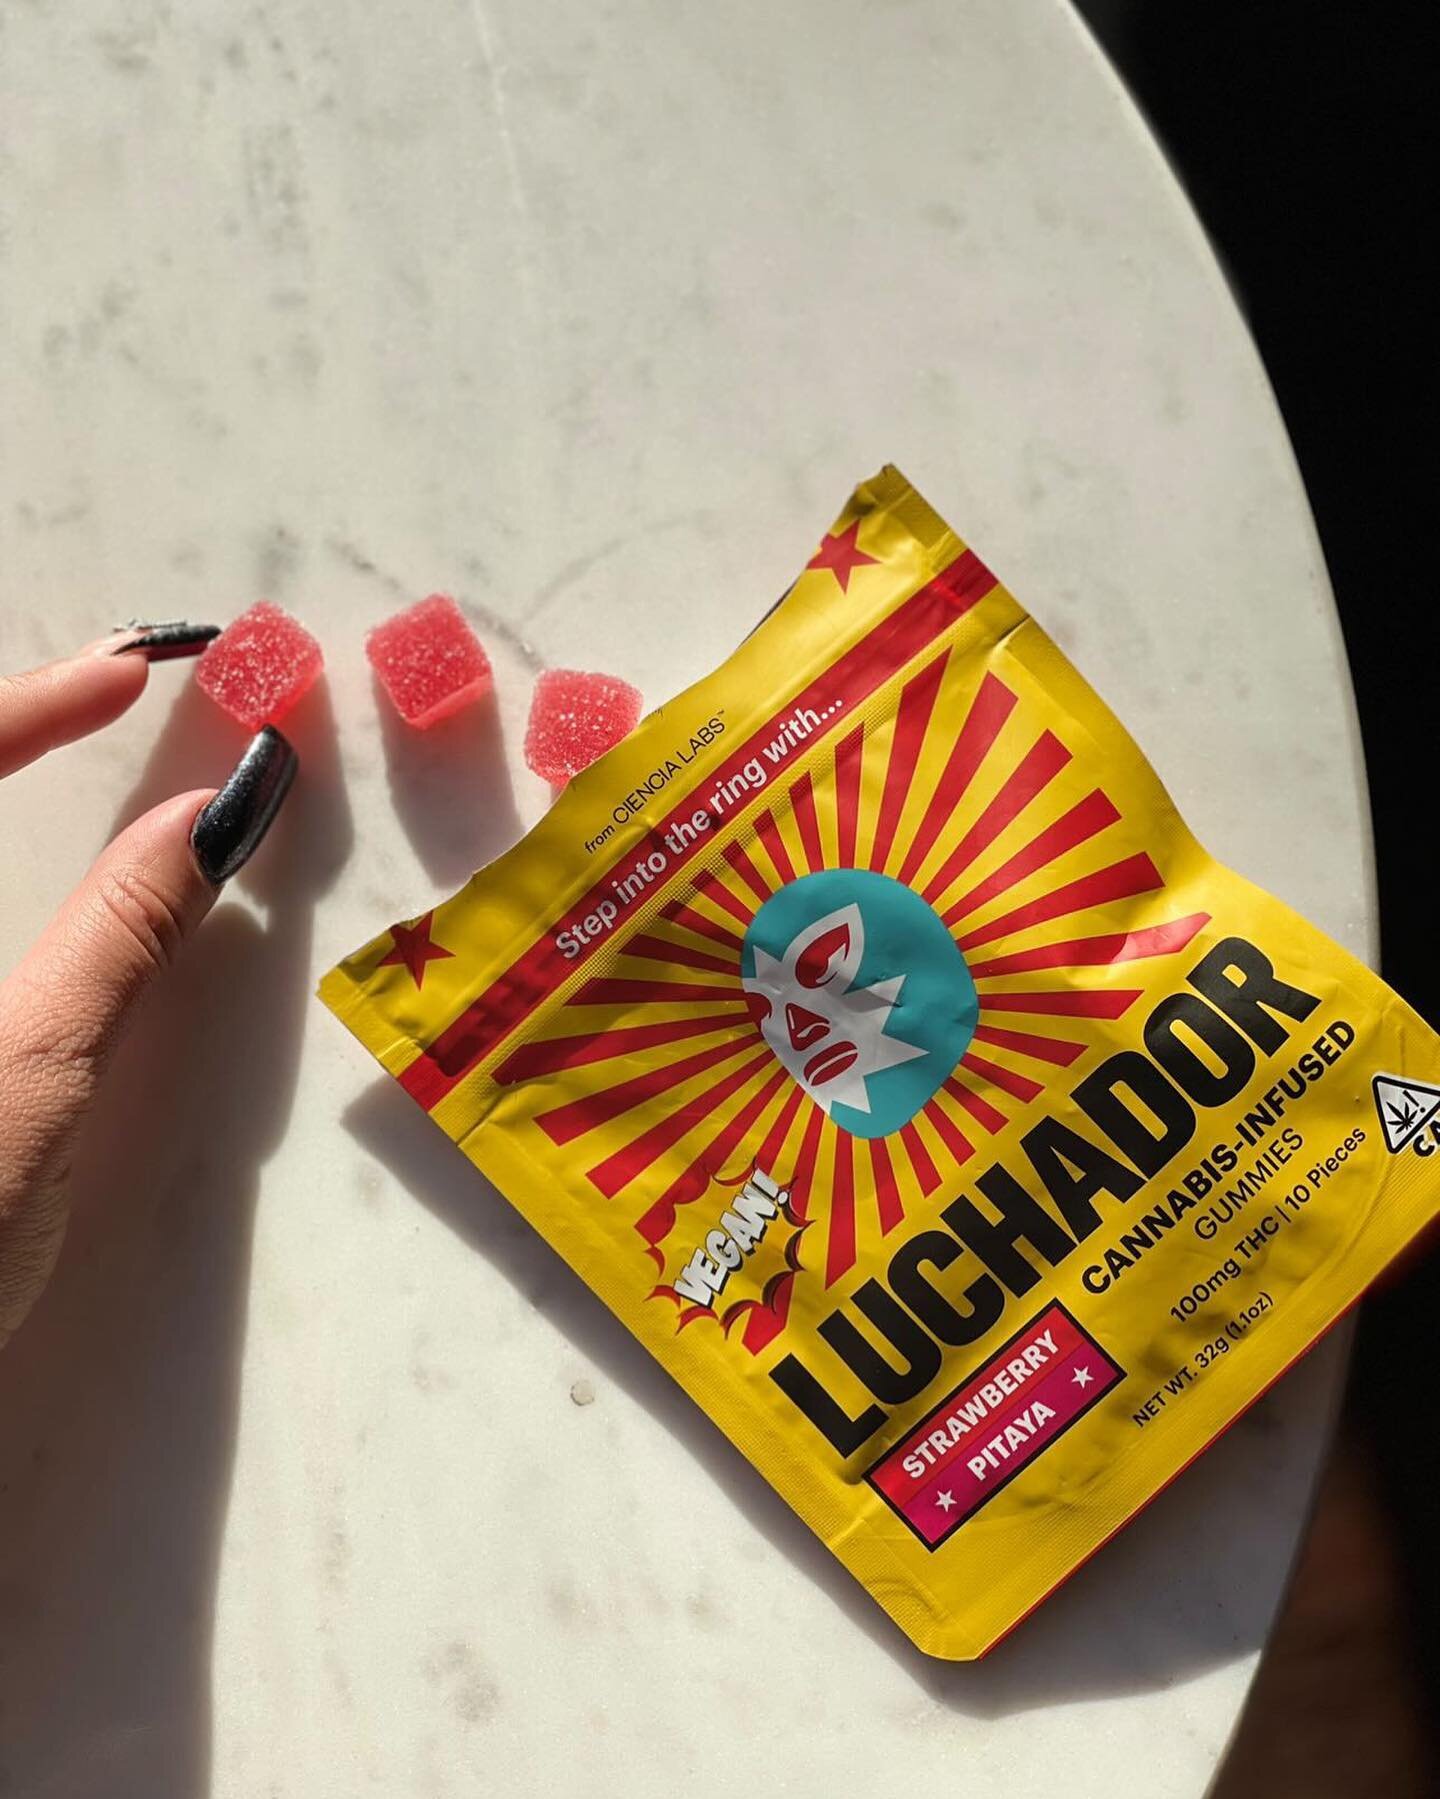 WEEKEND STARTIN EARLY WITH THE 10MG STRAWBERRY DRAGON FRUIT GEMS 🍓🐉💎 

📸 @stefanistract 💅🏽 #SUPERFUERTE